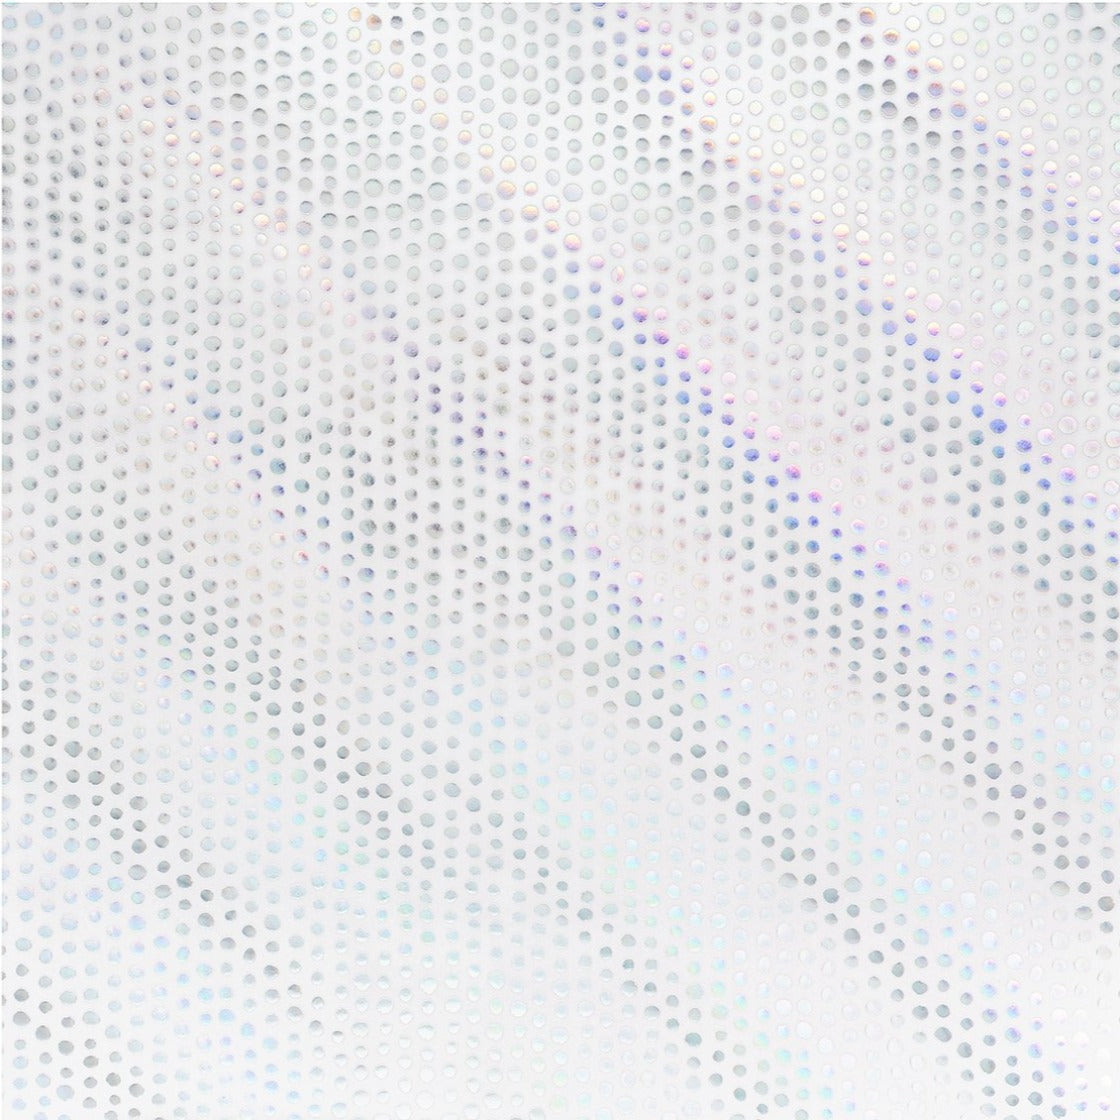 Holographic foil dots on 12x12 clear, white vellum paper by American Crafts